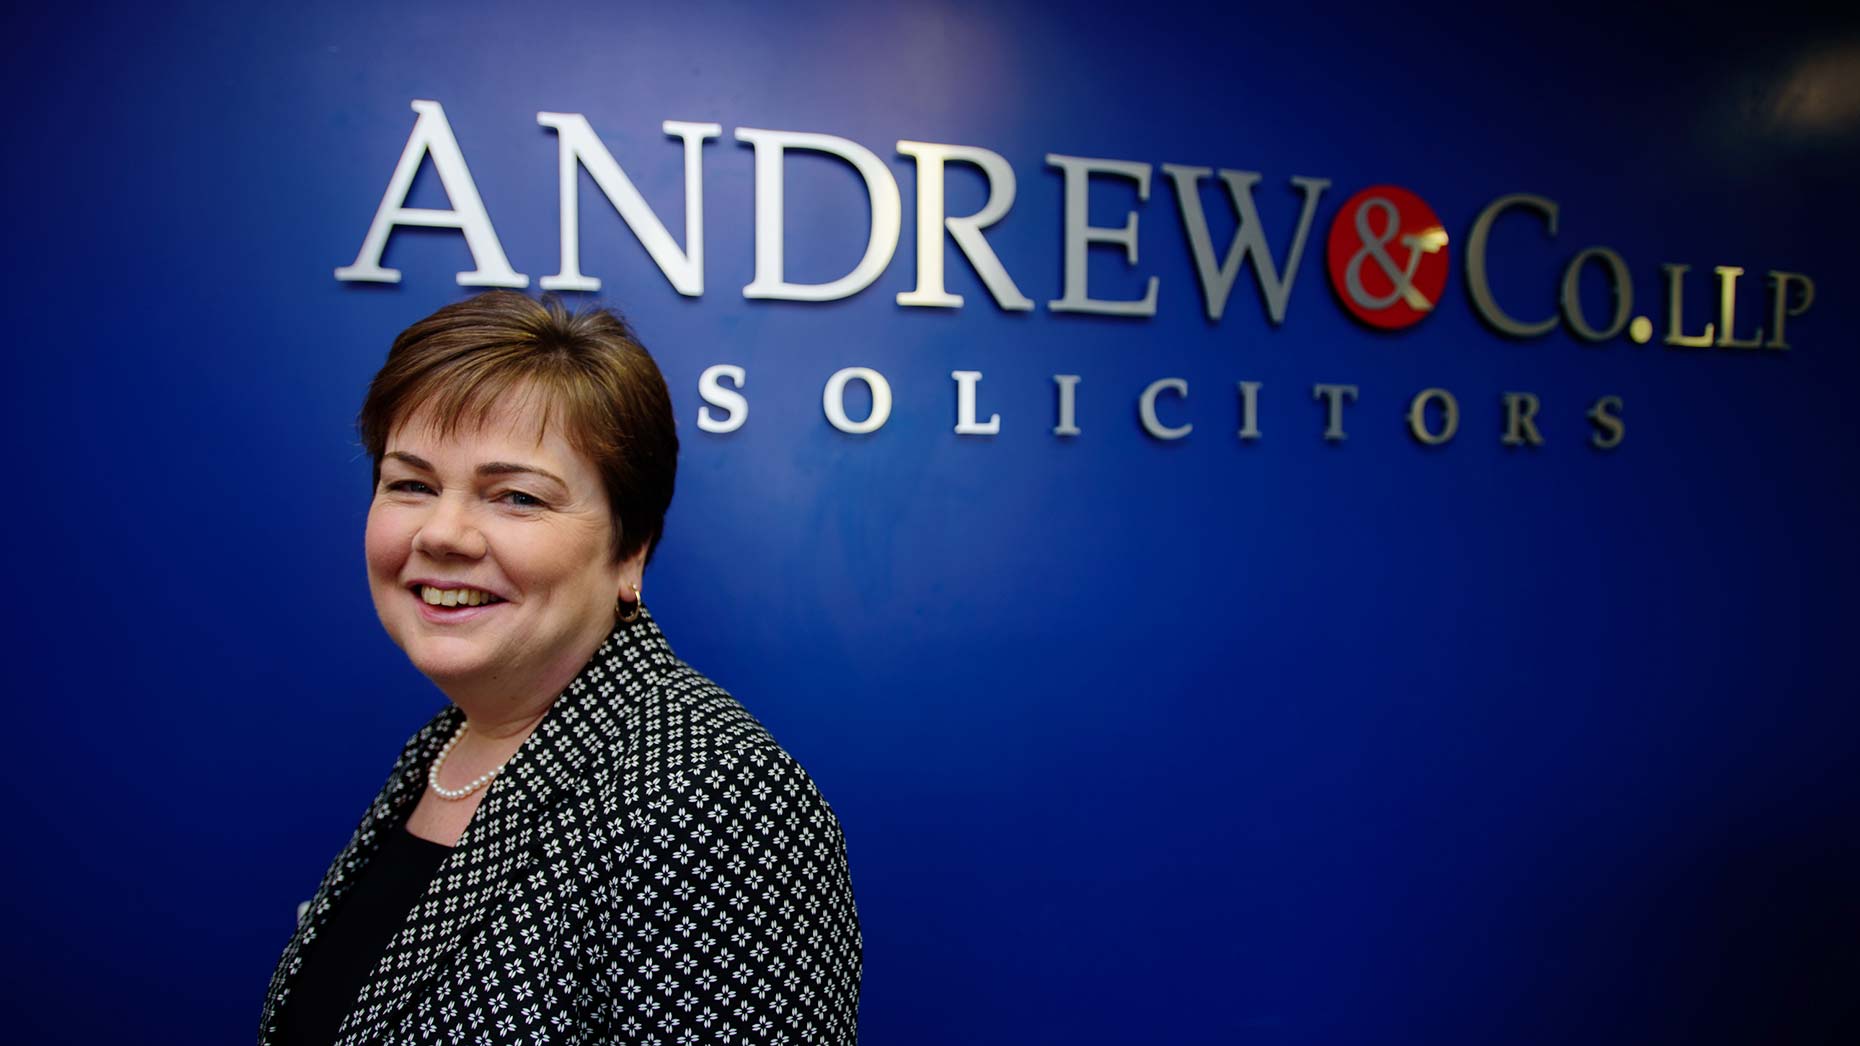 Julie Bailey, Chair of Andrew & Co LLP. Photo: Steve Smailes